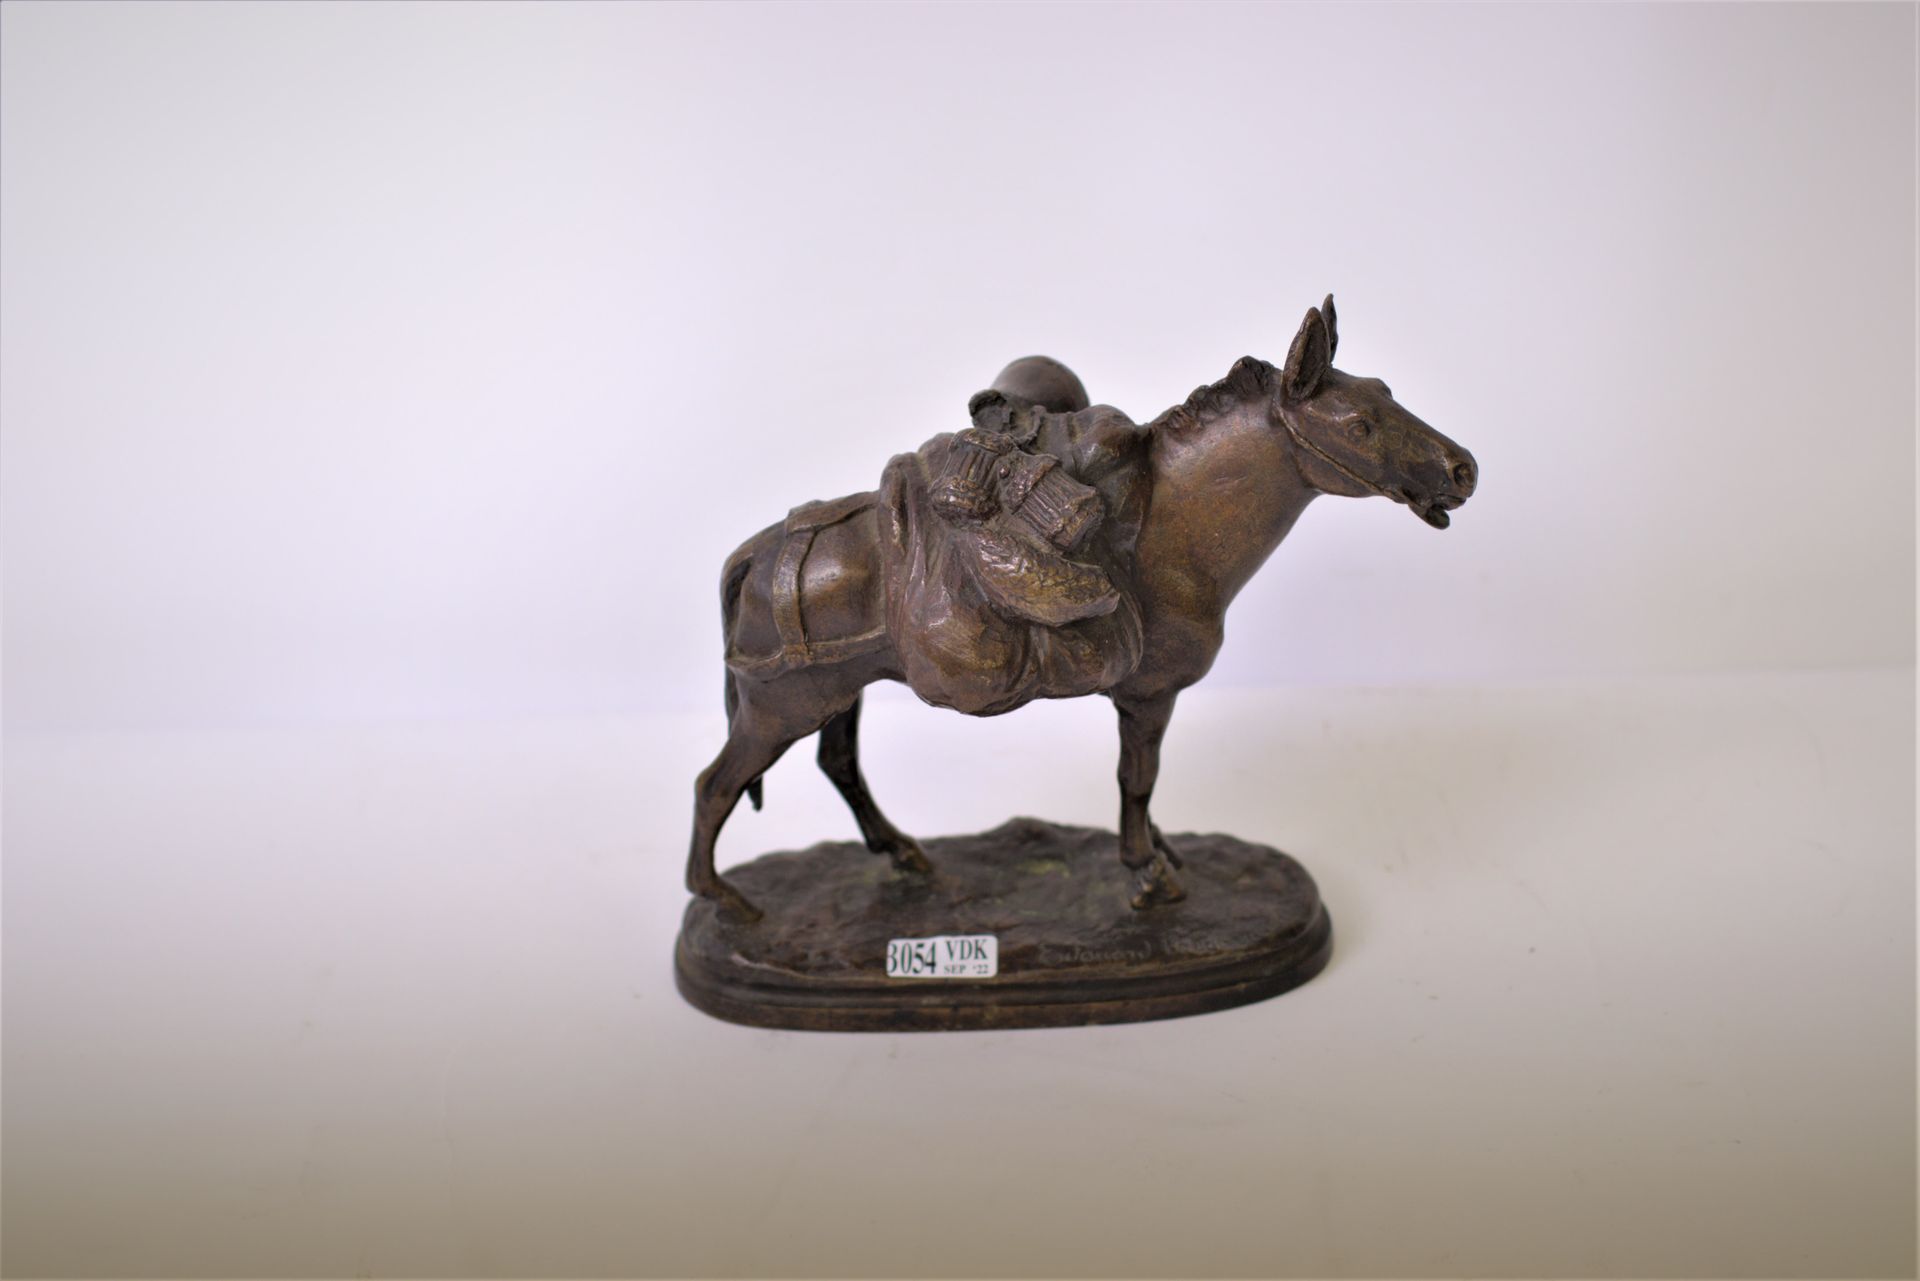 Null Bronze "Mule". Signed Letourneau. French work. Period : XIXth. H. : 15 cm.